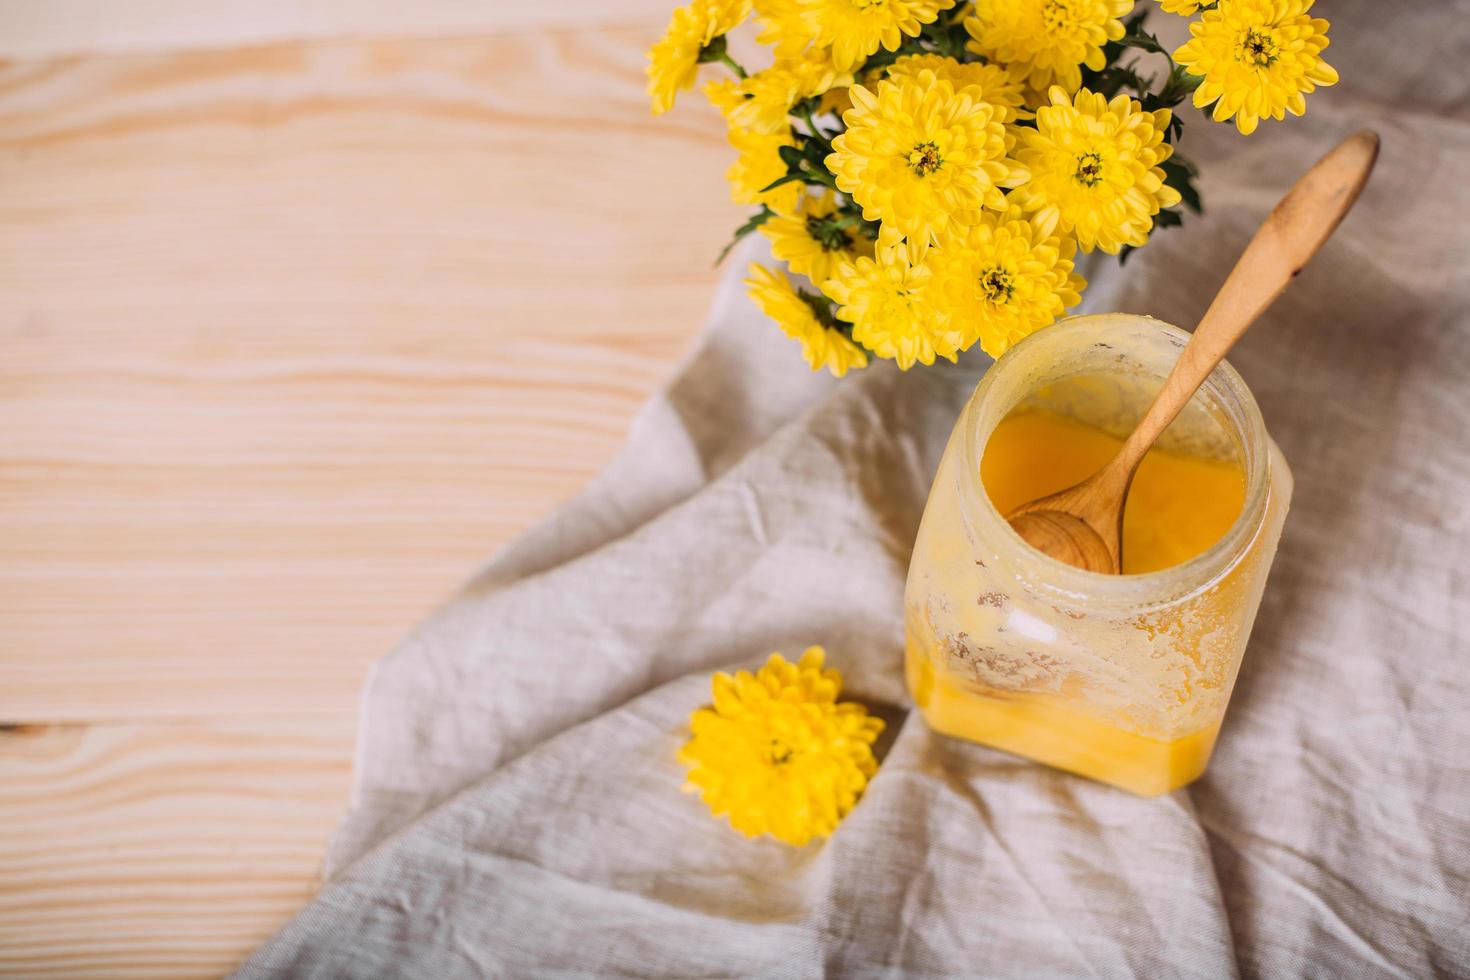 A jar of solid honey and flowers on wooden background. photo